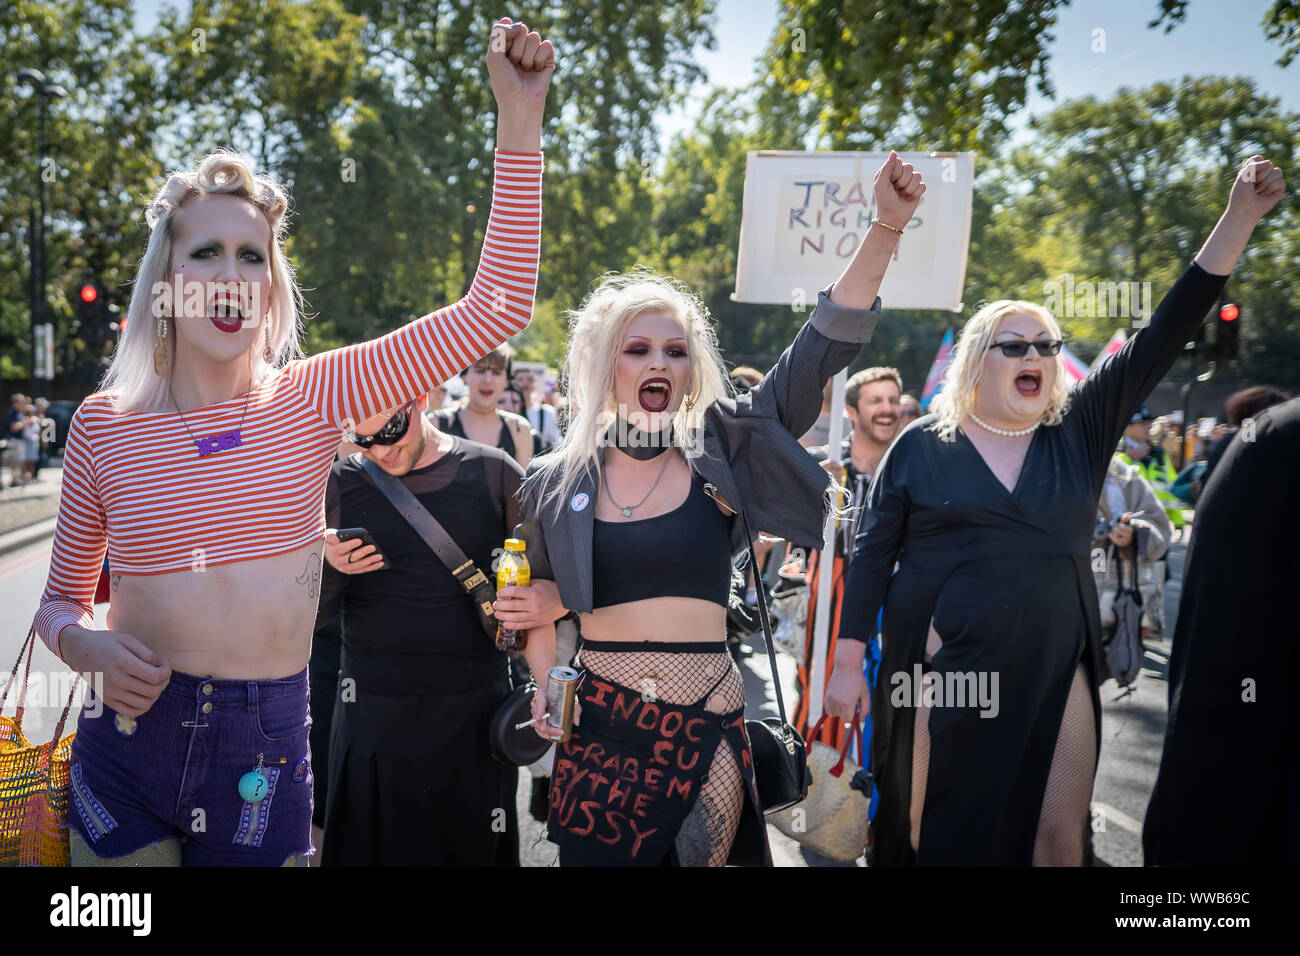 London, UK. 14th September, 2019. Hundreds of transgender people and supporters gather near Wellington Arch ready for the first Trans Pride march through the city. Rooted in activism, calling for change and also celebrating the lives of trans people around the world, Trans Pride March aims to bring further awareness to on-going attacks on trans people, both online and in the real world. Police data in June revealed that transphobic hate crimes were up by 81 per cent over the past year. Credit: Guy Corbishley/Alamy Live News Stock Photo